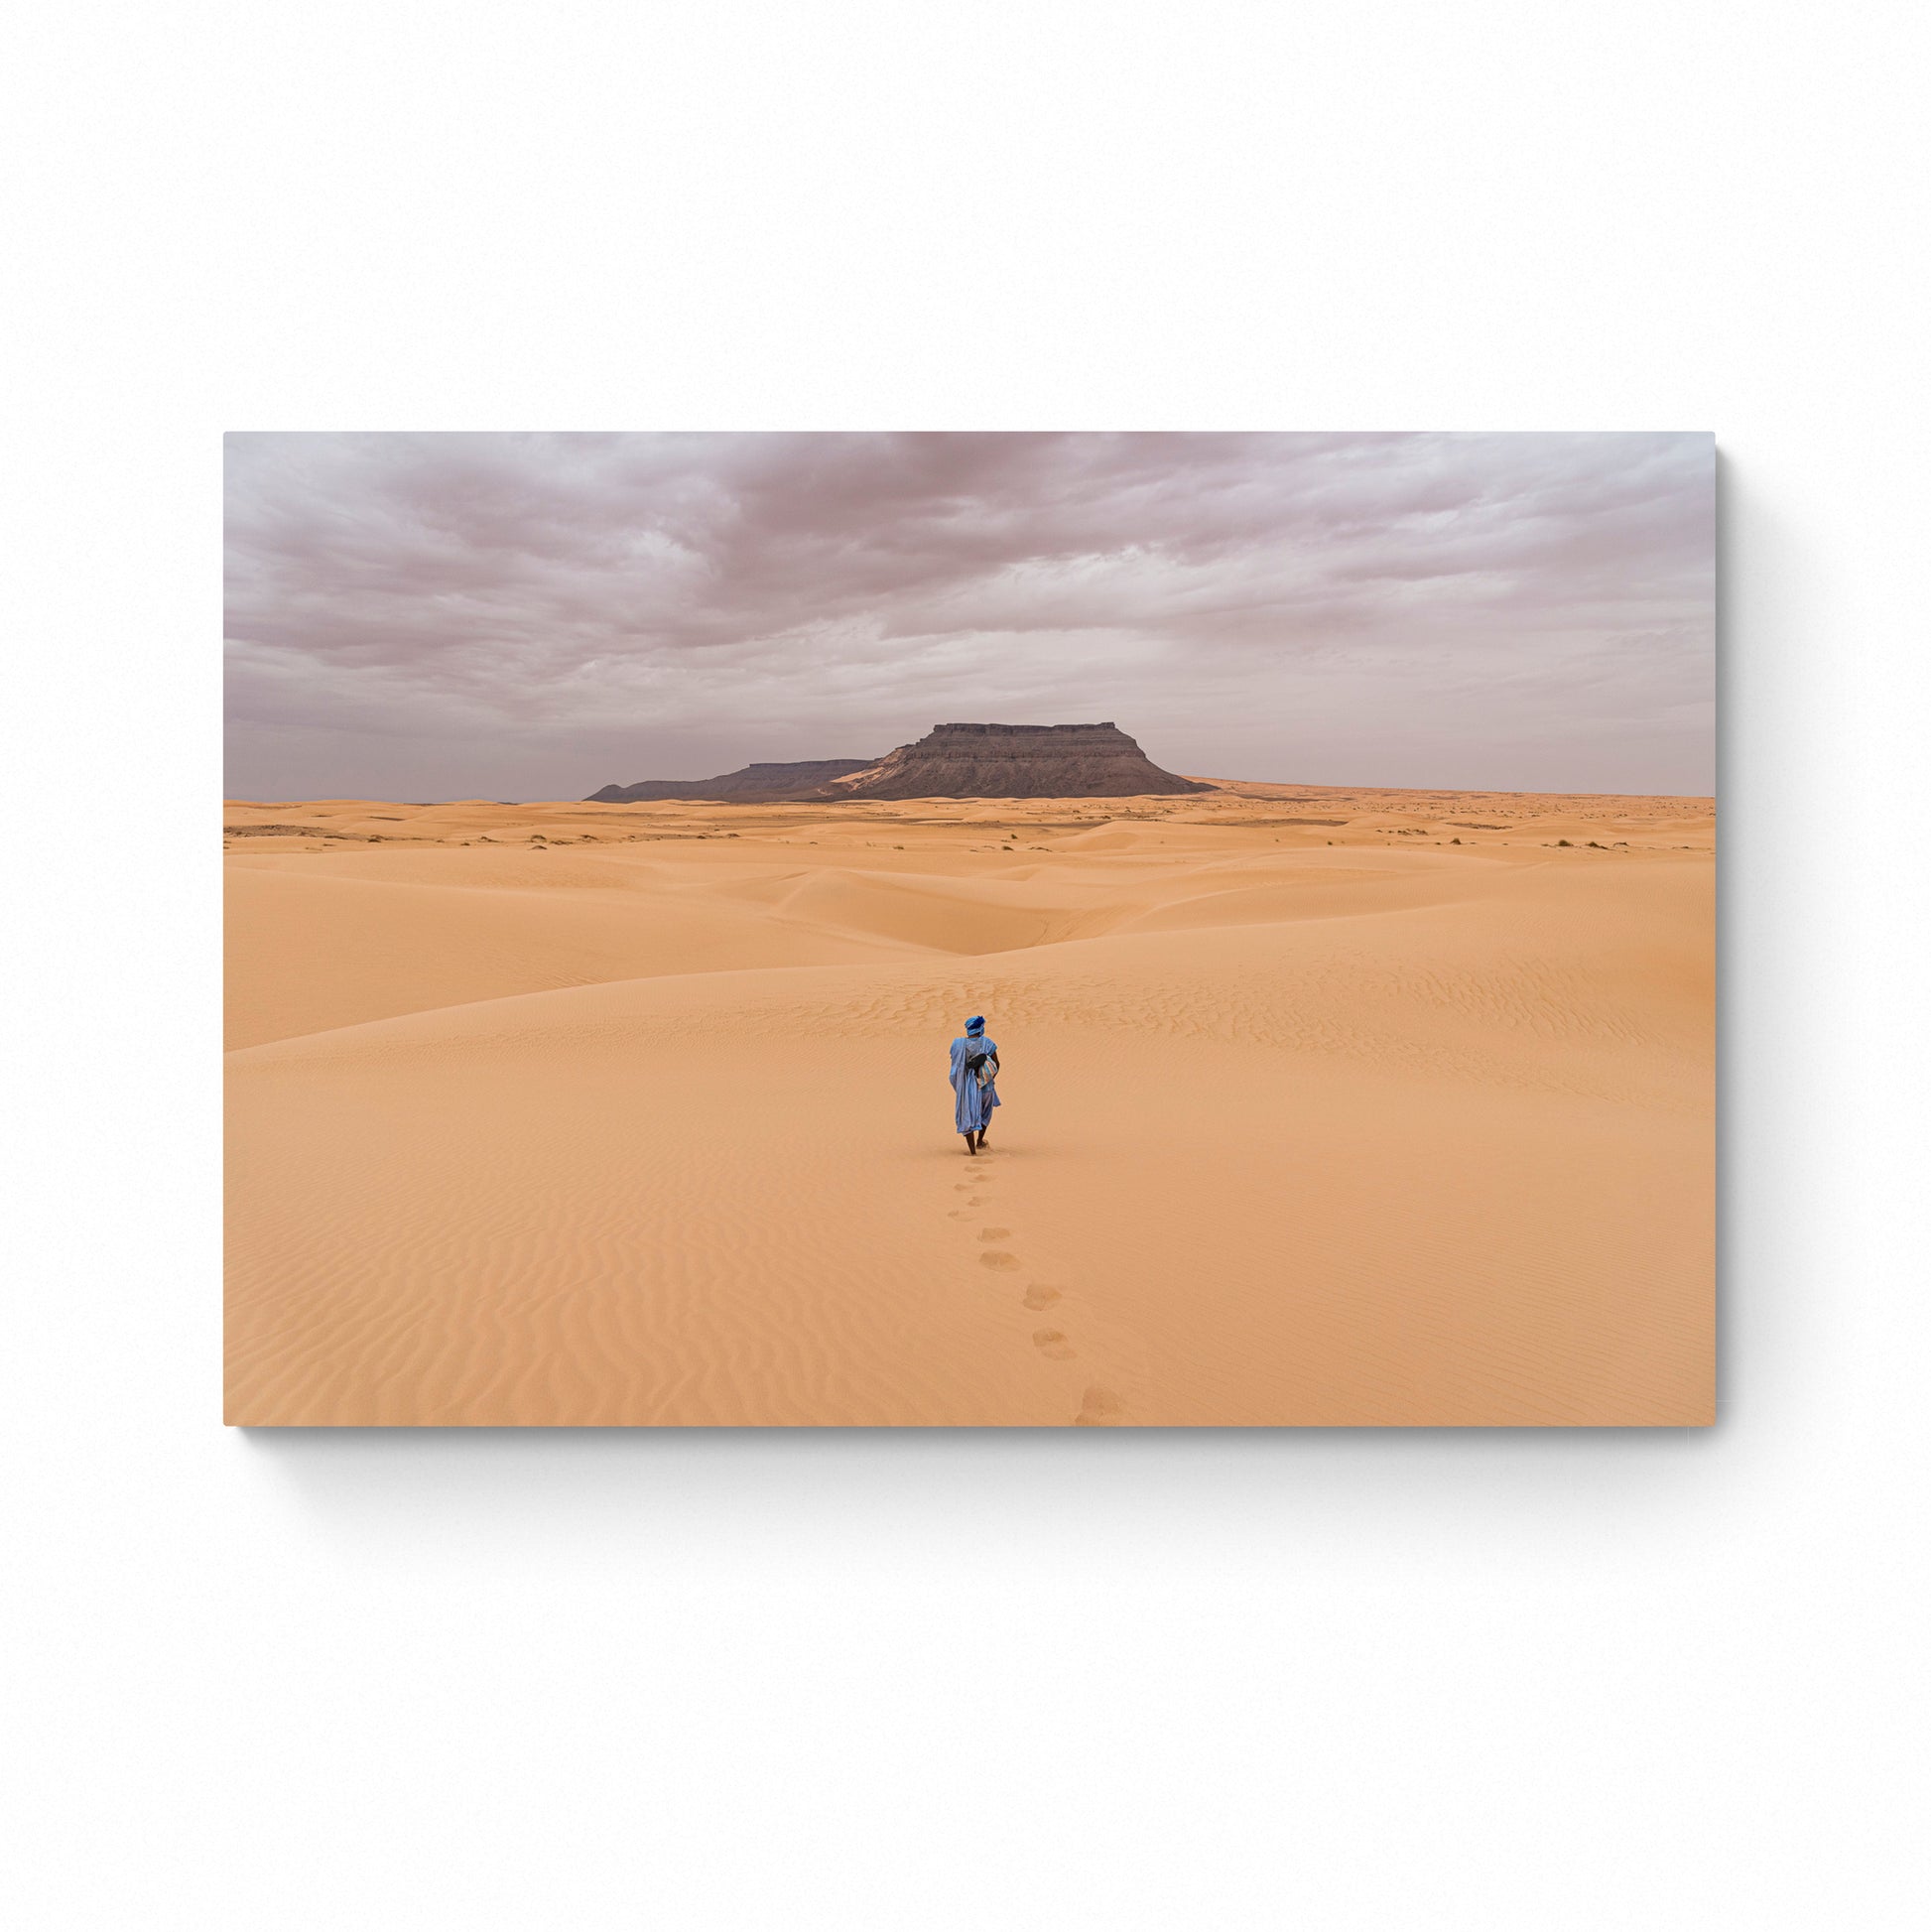 pictures of the sahara desert